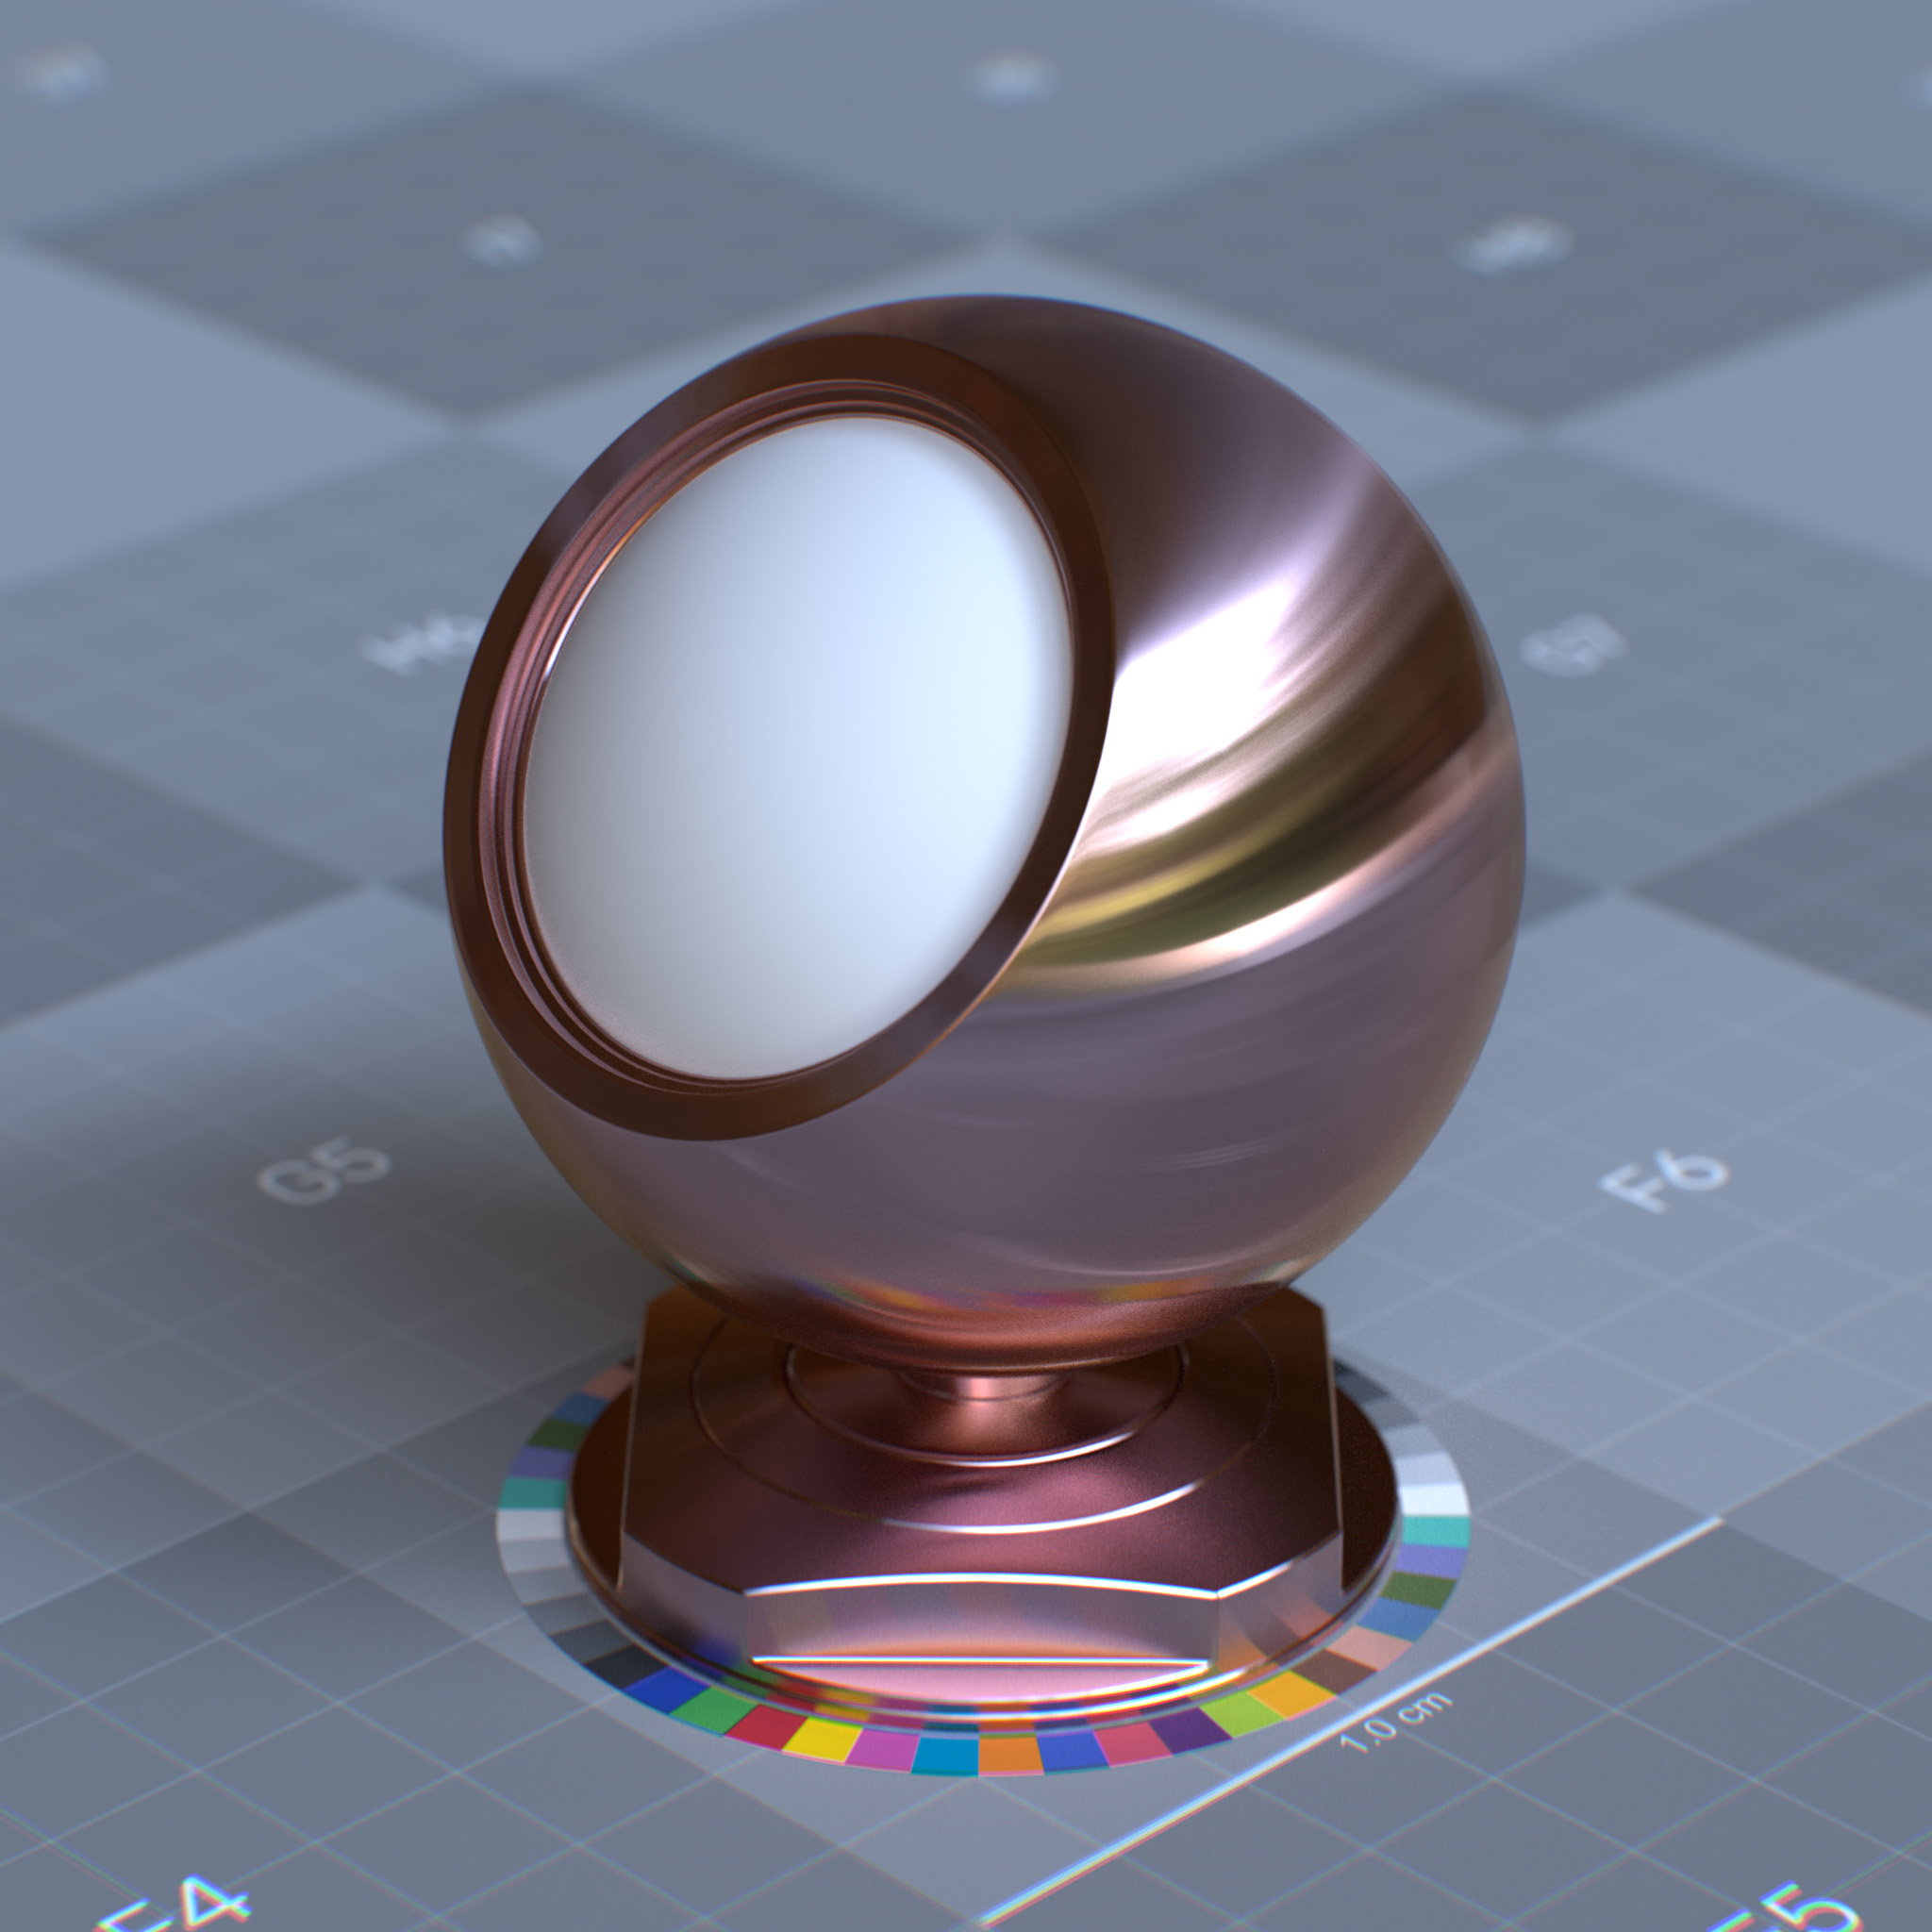 rtx_material_omnisurfacebase_specular_reflection_anisotropy_1p0